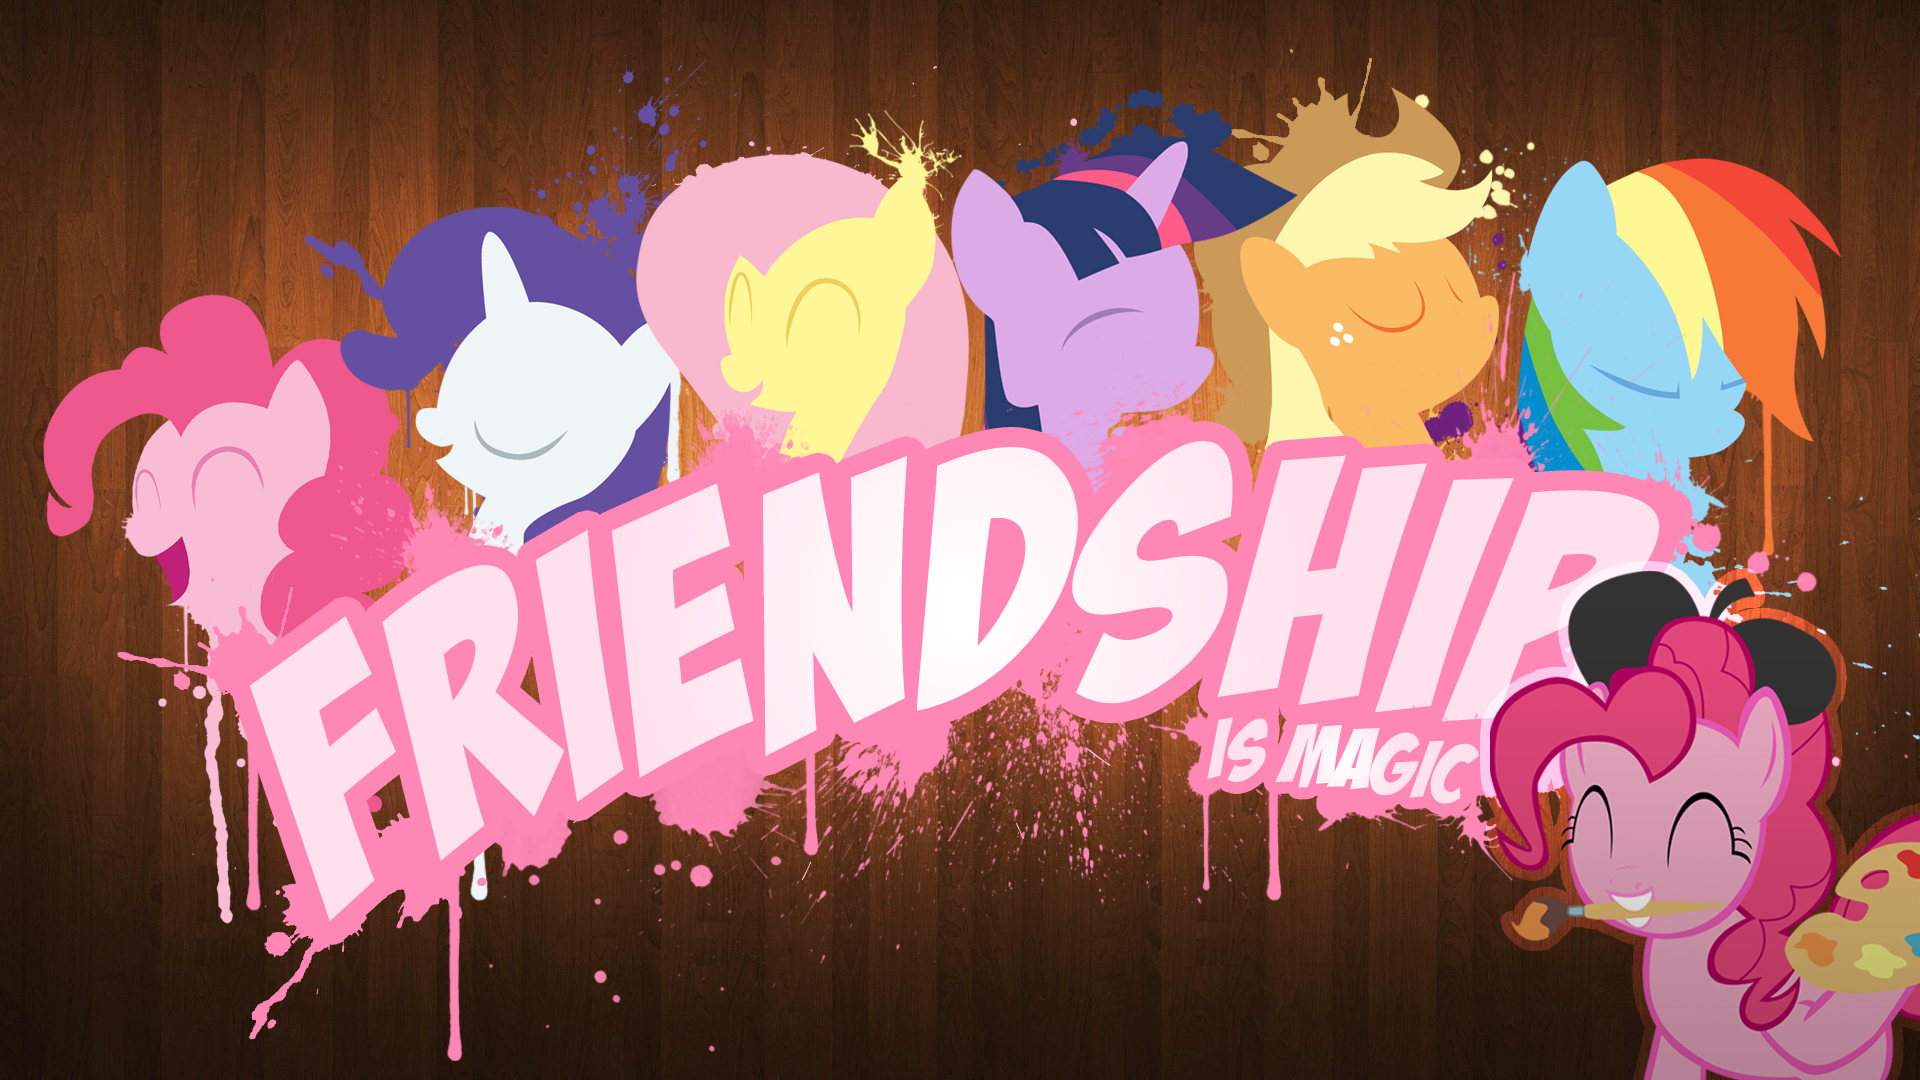 Friendship - is magic Wallpaper by kres0185 and miketueur